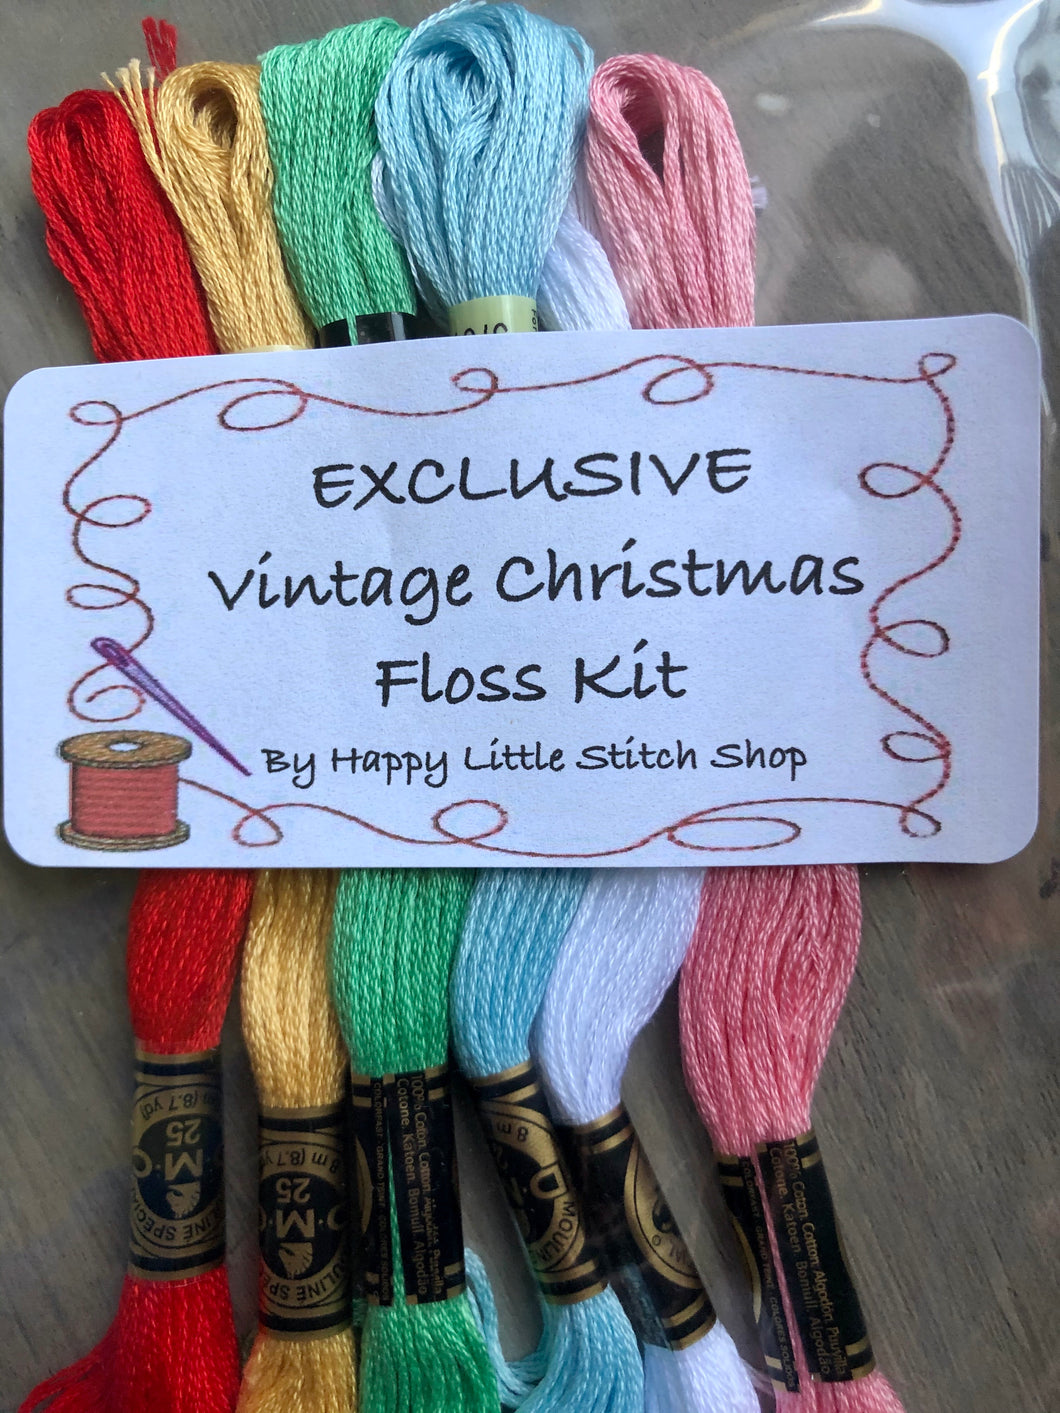 Floss Kit - EXCLUSIVE Vintage Christmas by Flamingo Toes